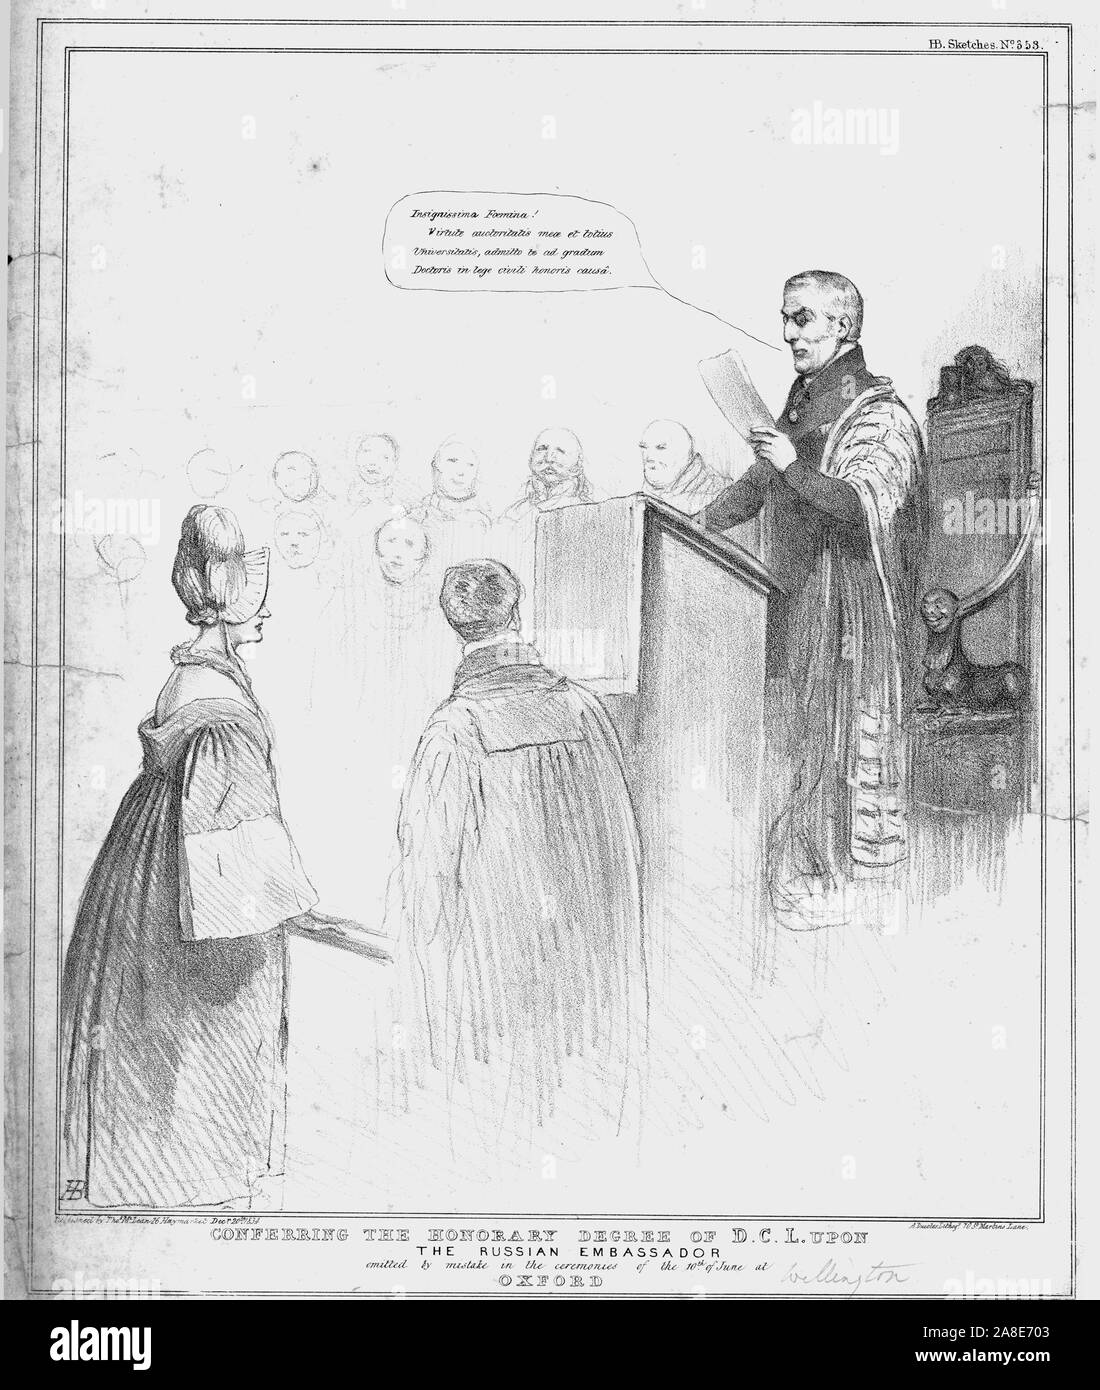 'Conferring the Honorary Degree of D.C.L. Upon The Russian Embassador, omitted by mistake in the ceremonies of the 10th June at Oxford', 1834. Chancellor of Oxford University Arthur Wellesley, 1st Duke of Wellington, confers the DCL (Doctor of Civil Law) degree on Christoph von Lieven, Russian ambassador to London, as Lieven's wife Dorothea Khristoforovna Lieven looks on. Satirical cartoon on British politics by 'H.B.' (John Doyle). [Thomas McLean, London, 1834] Stock Photo